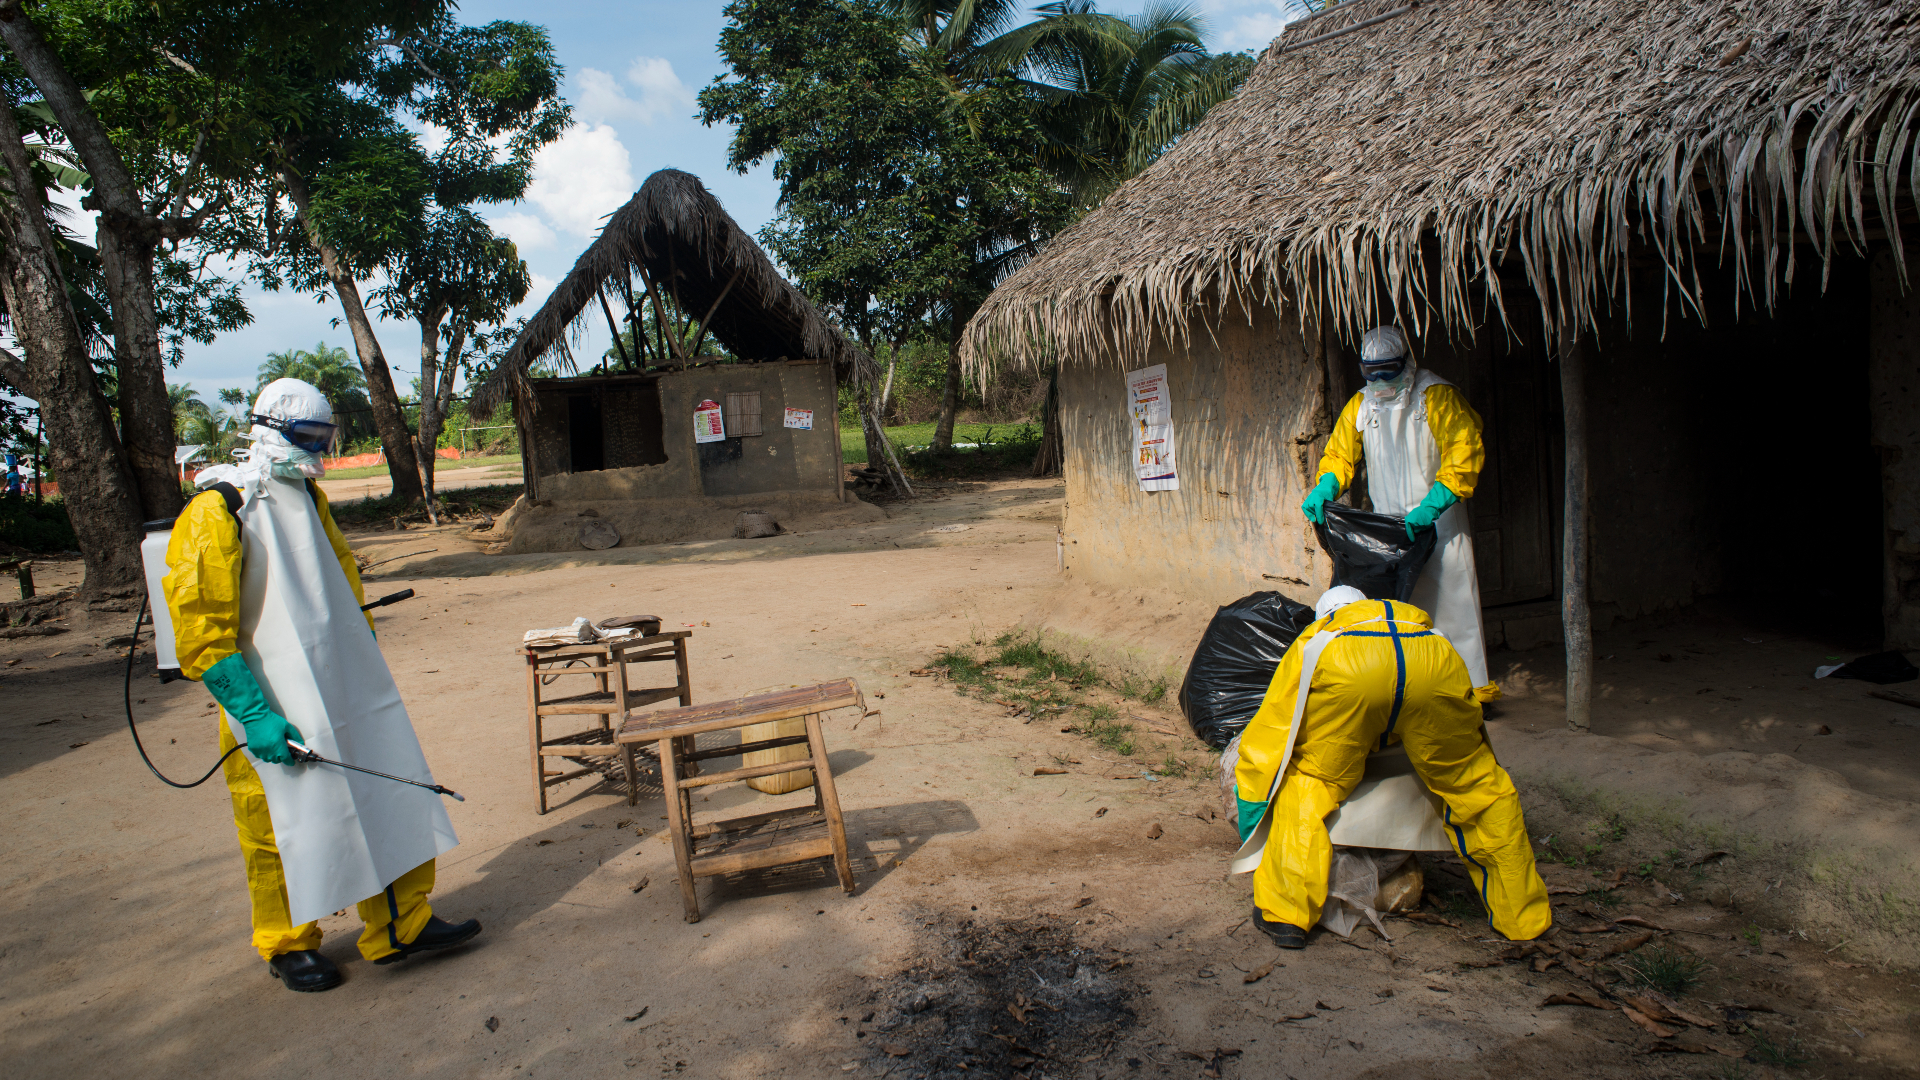 Medicins Sans Frontieres workers disinfect a home in Quewein, Liberia, where a person fell ill with Ebola on Thursday, December 11, 2014.